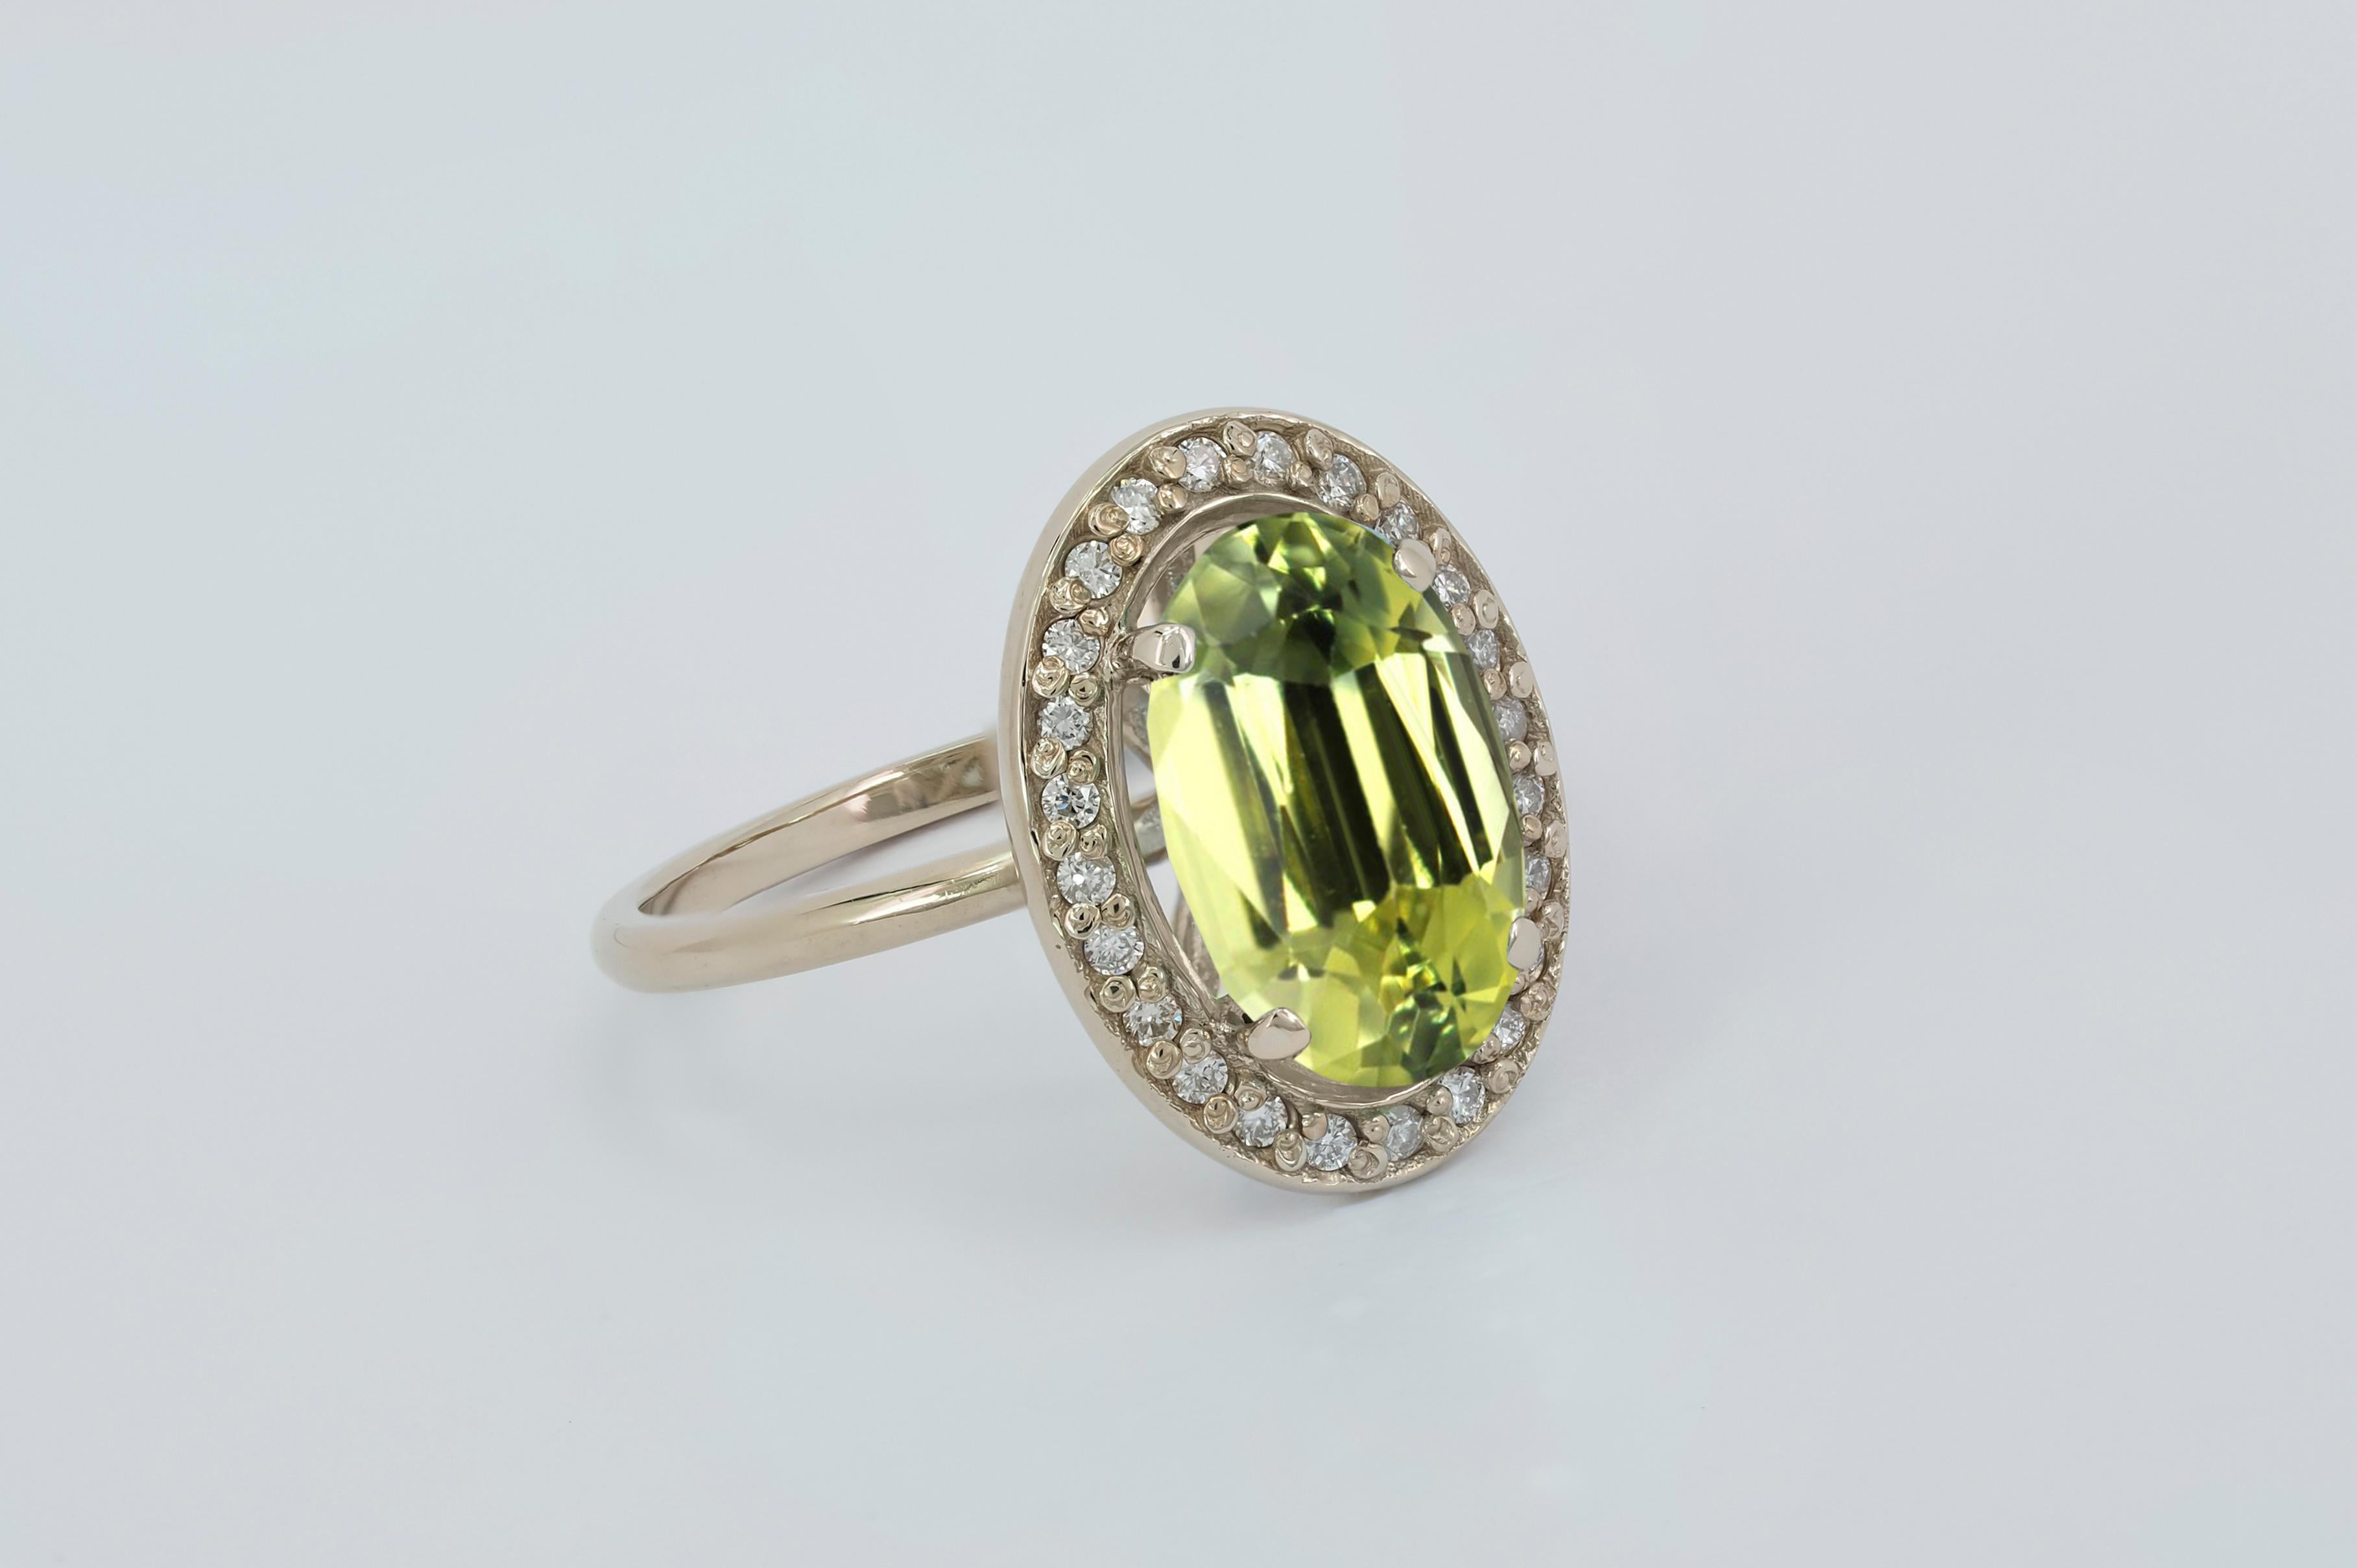 For Sale:  Peridot and diamonds 14k gold ring. 4